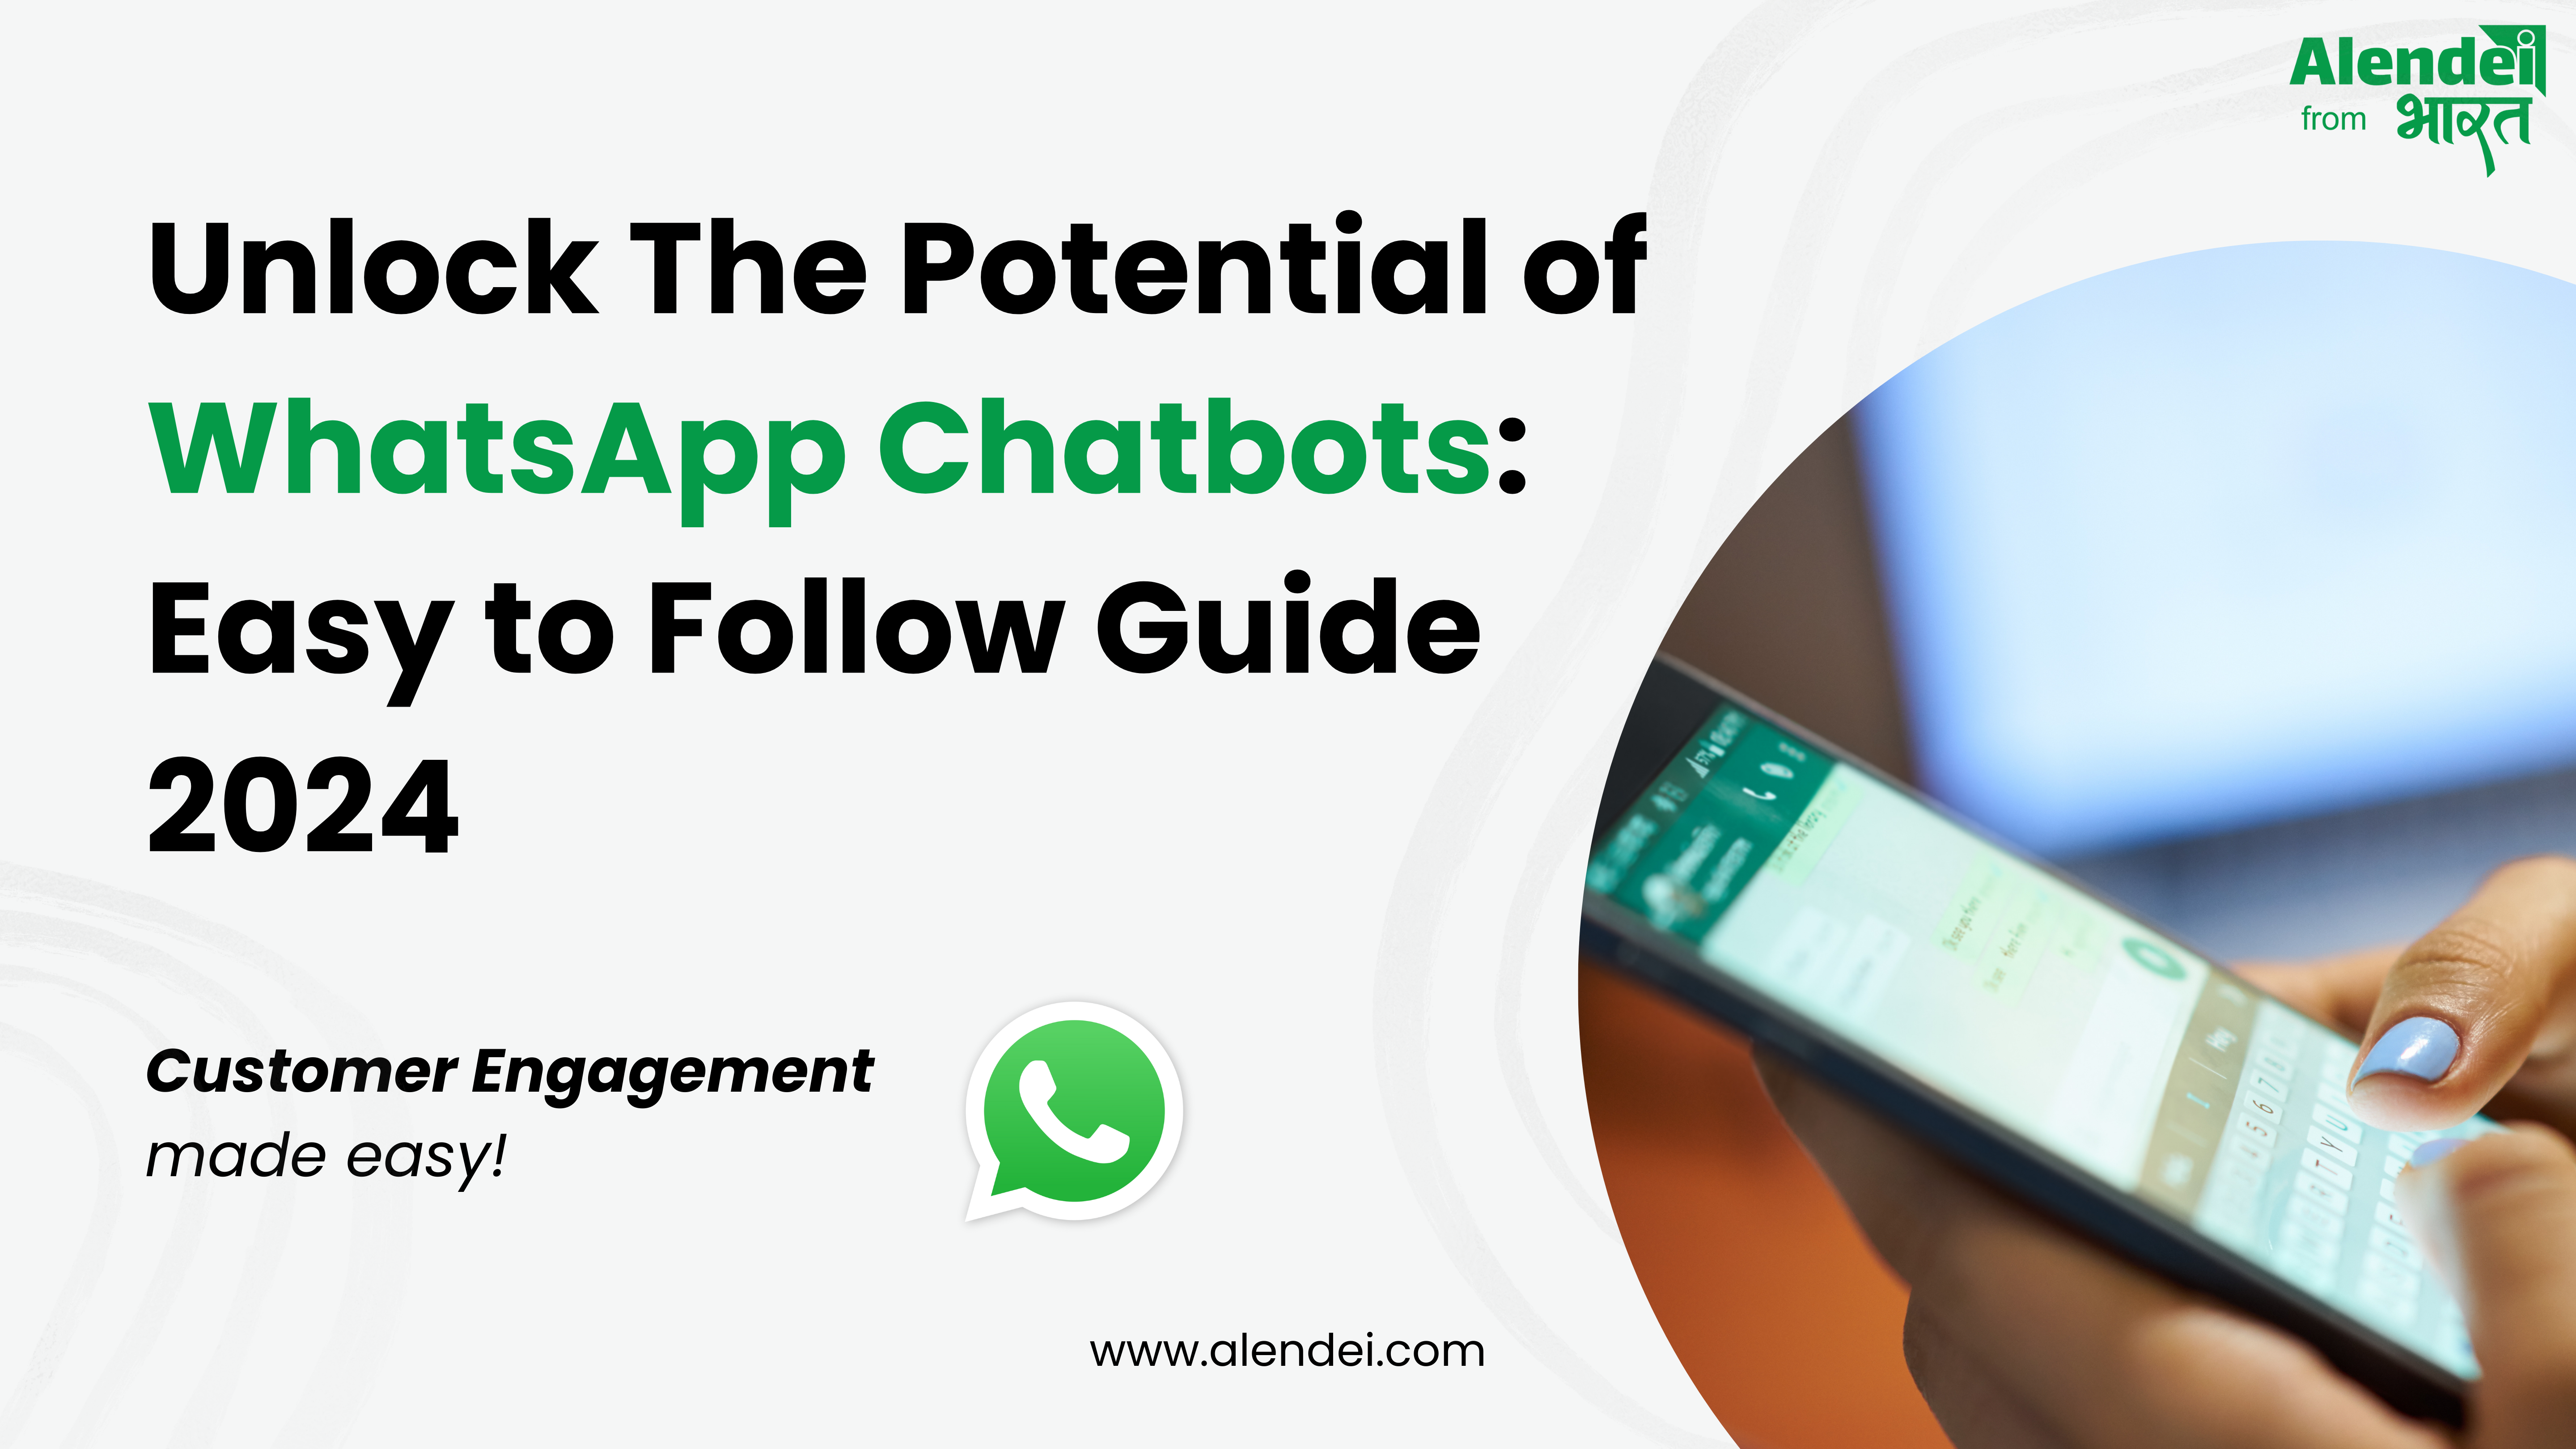 Unlock The Potential of WhatsApp Chatbots: Easy to Follow Guide 2024